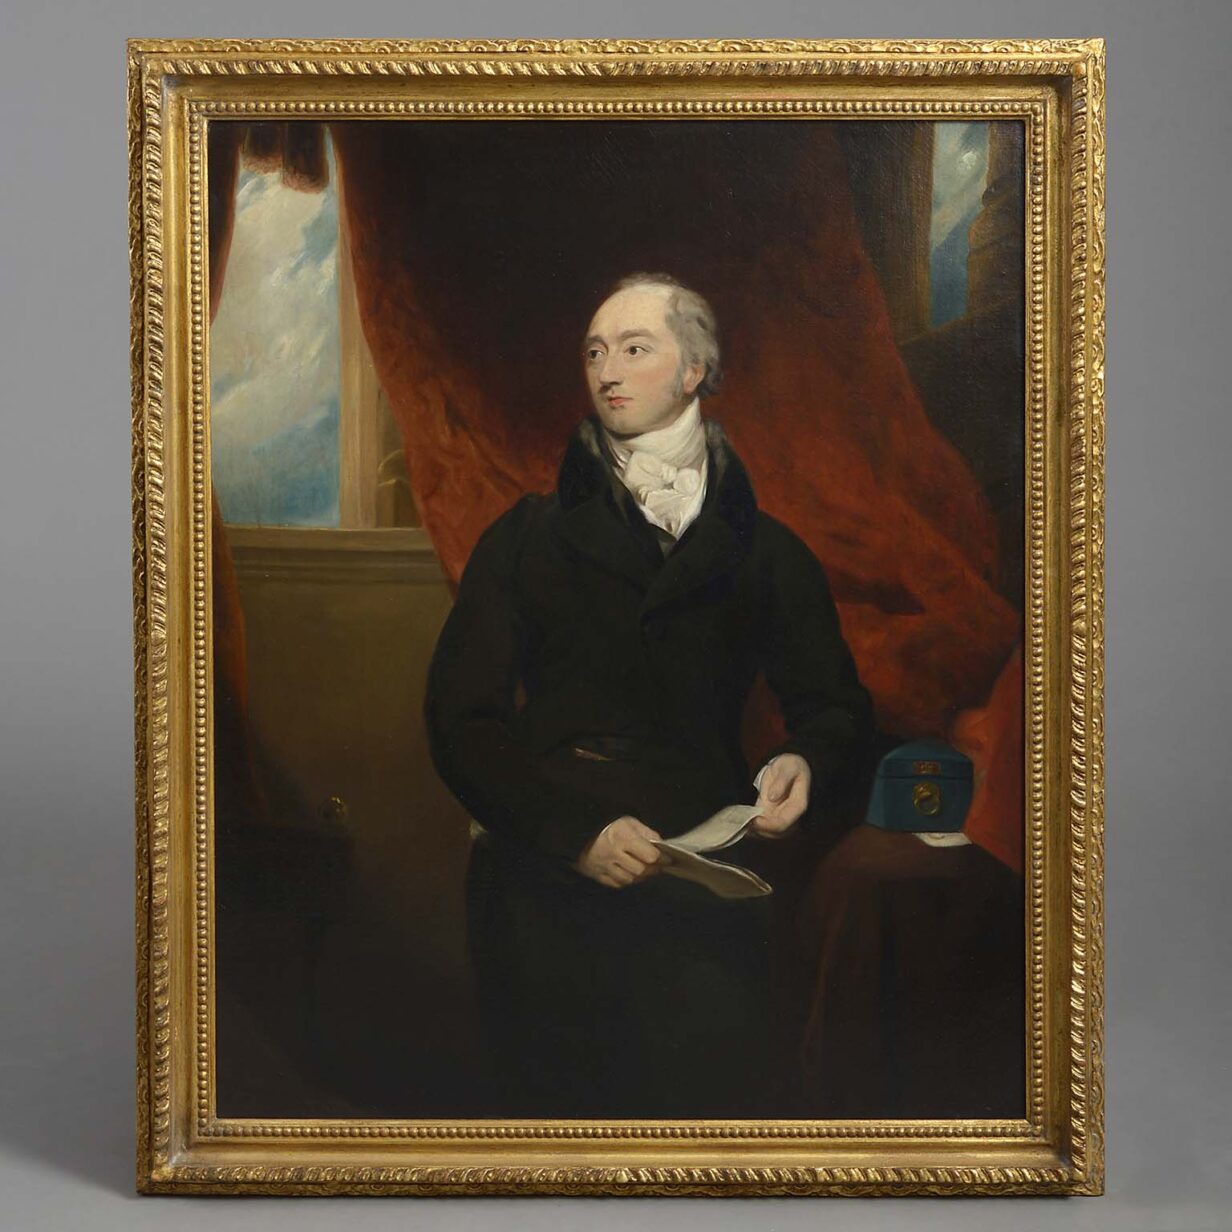 After sir thomas lawrence, 19th century portrait of george canning pm (1770-1827)